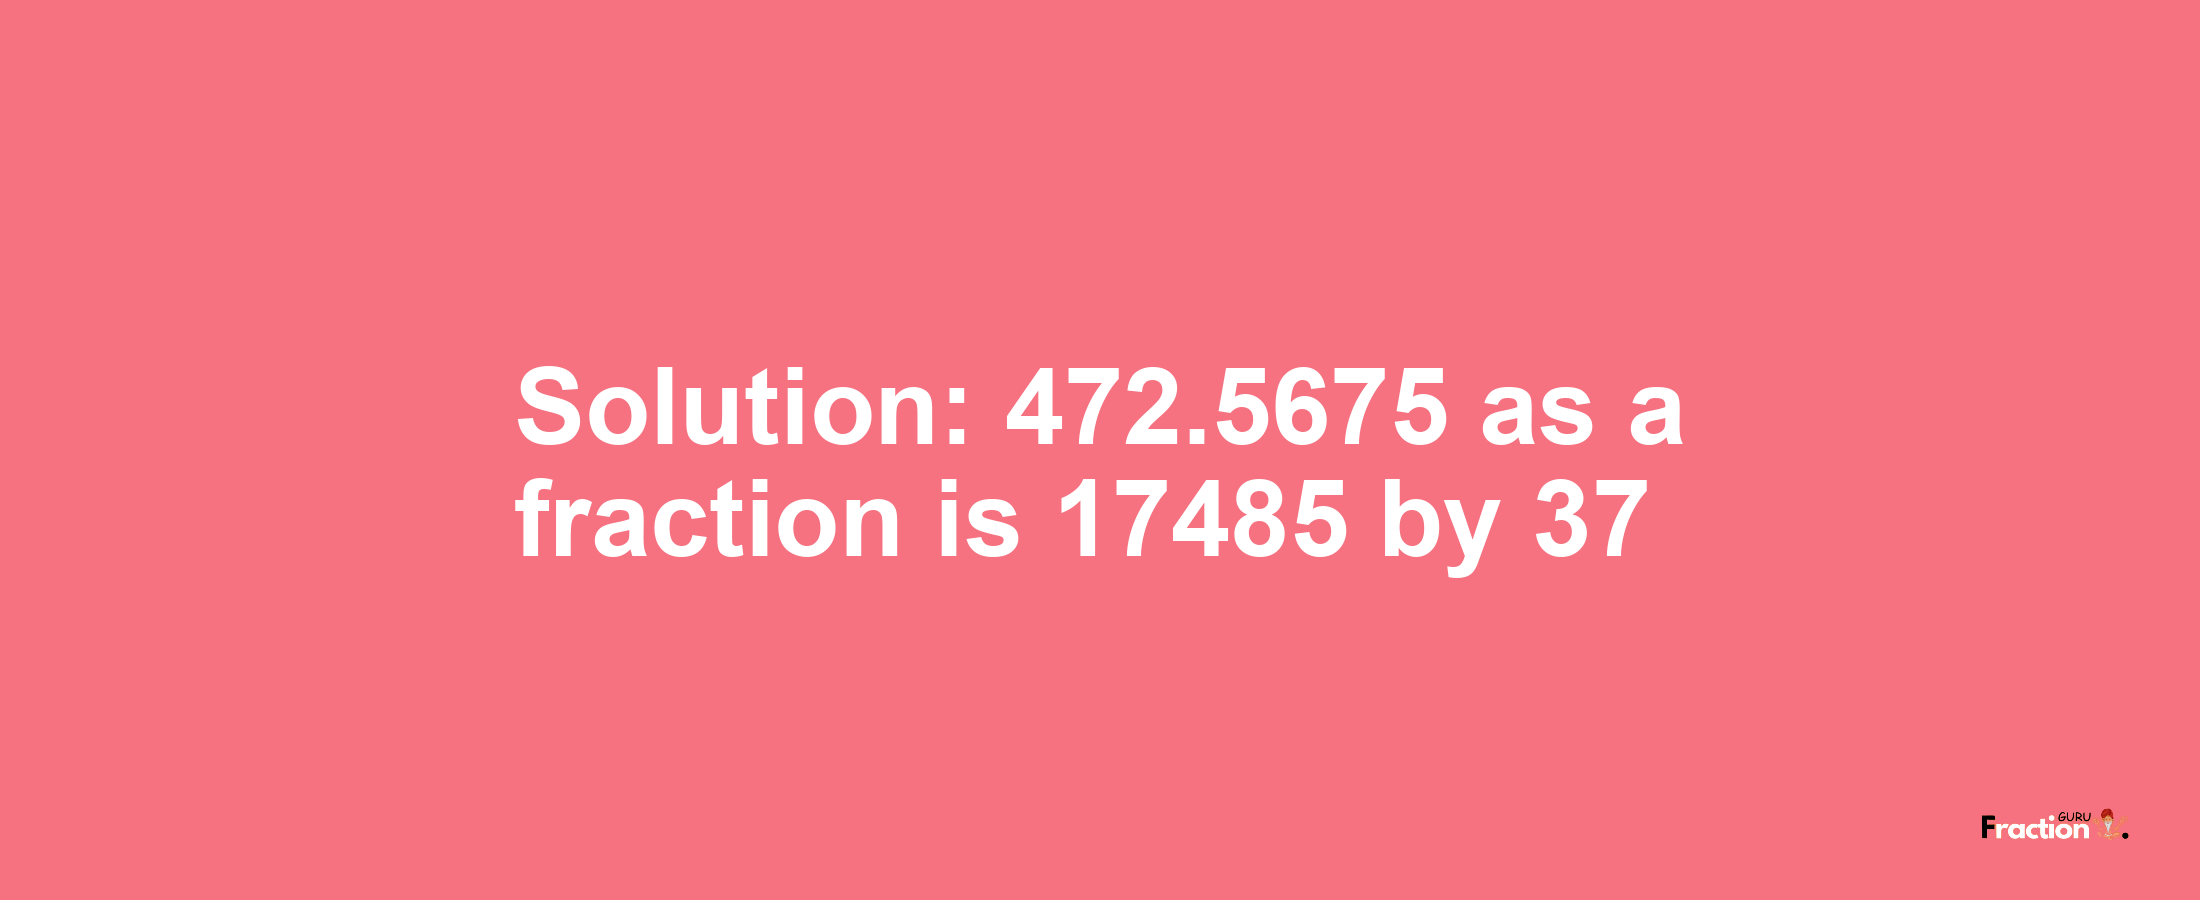 Solution:472.5675 as a fraction is 17485/37